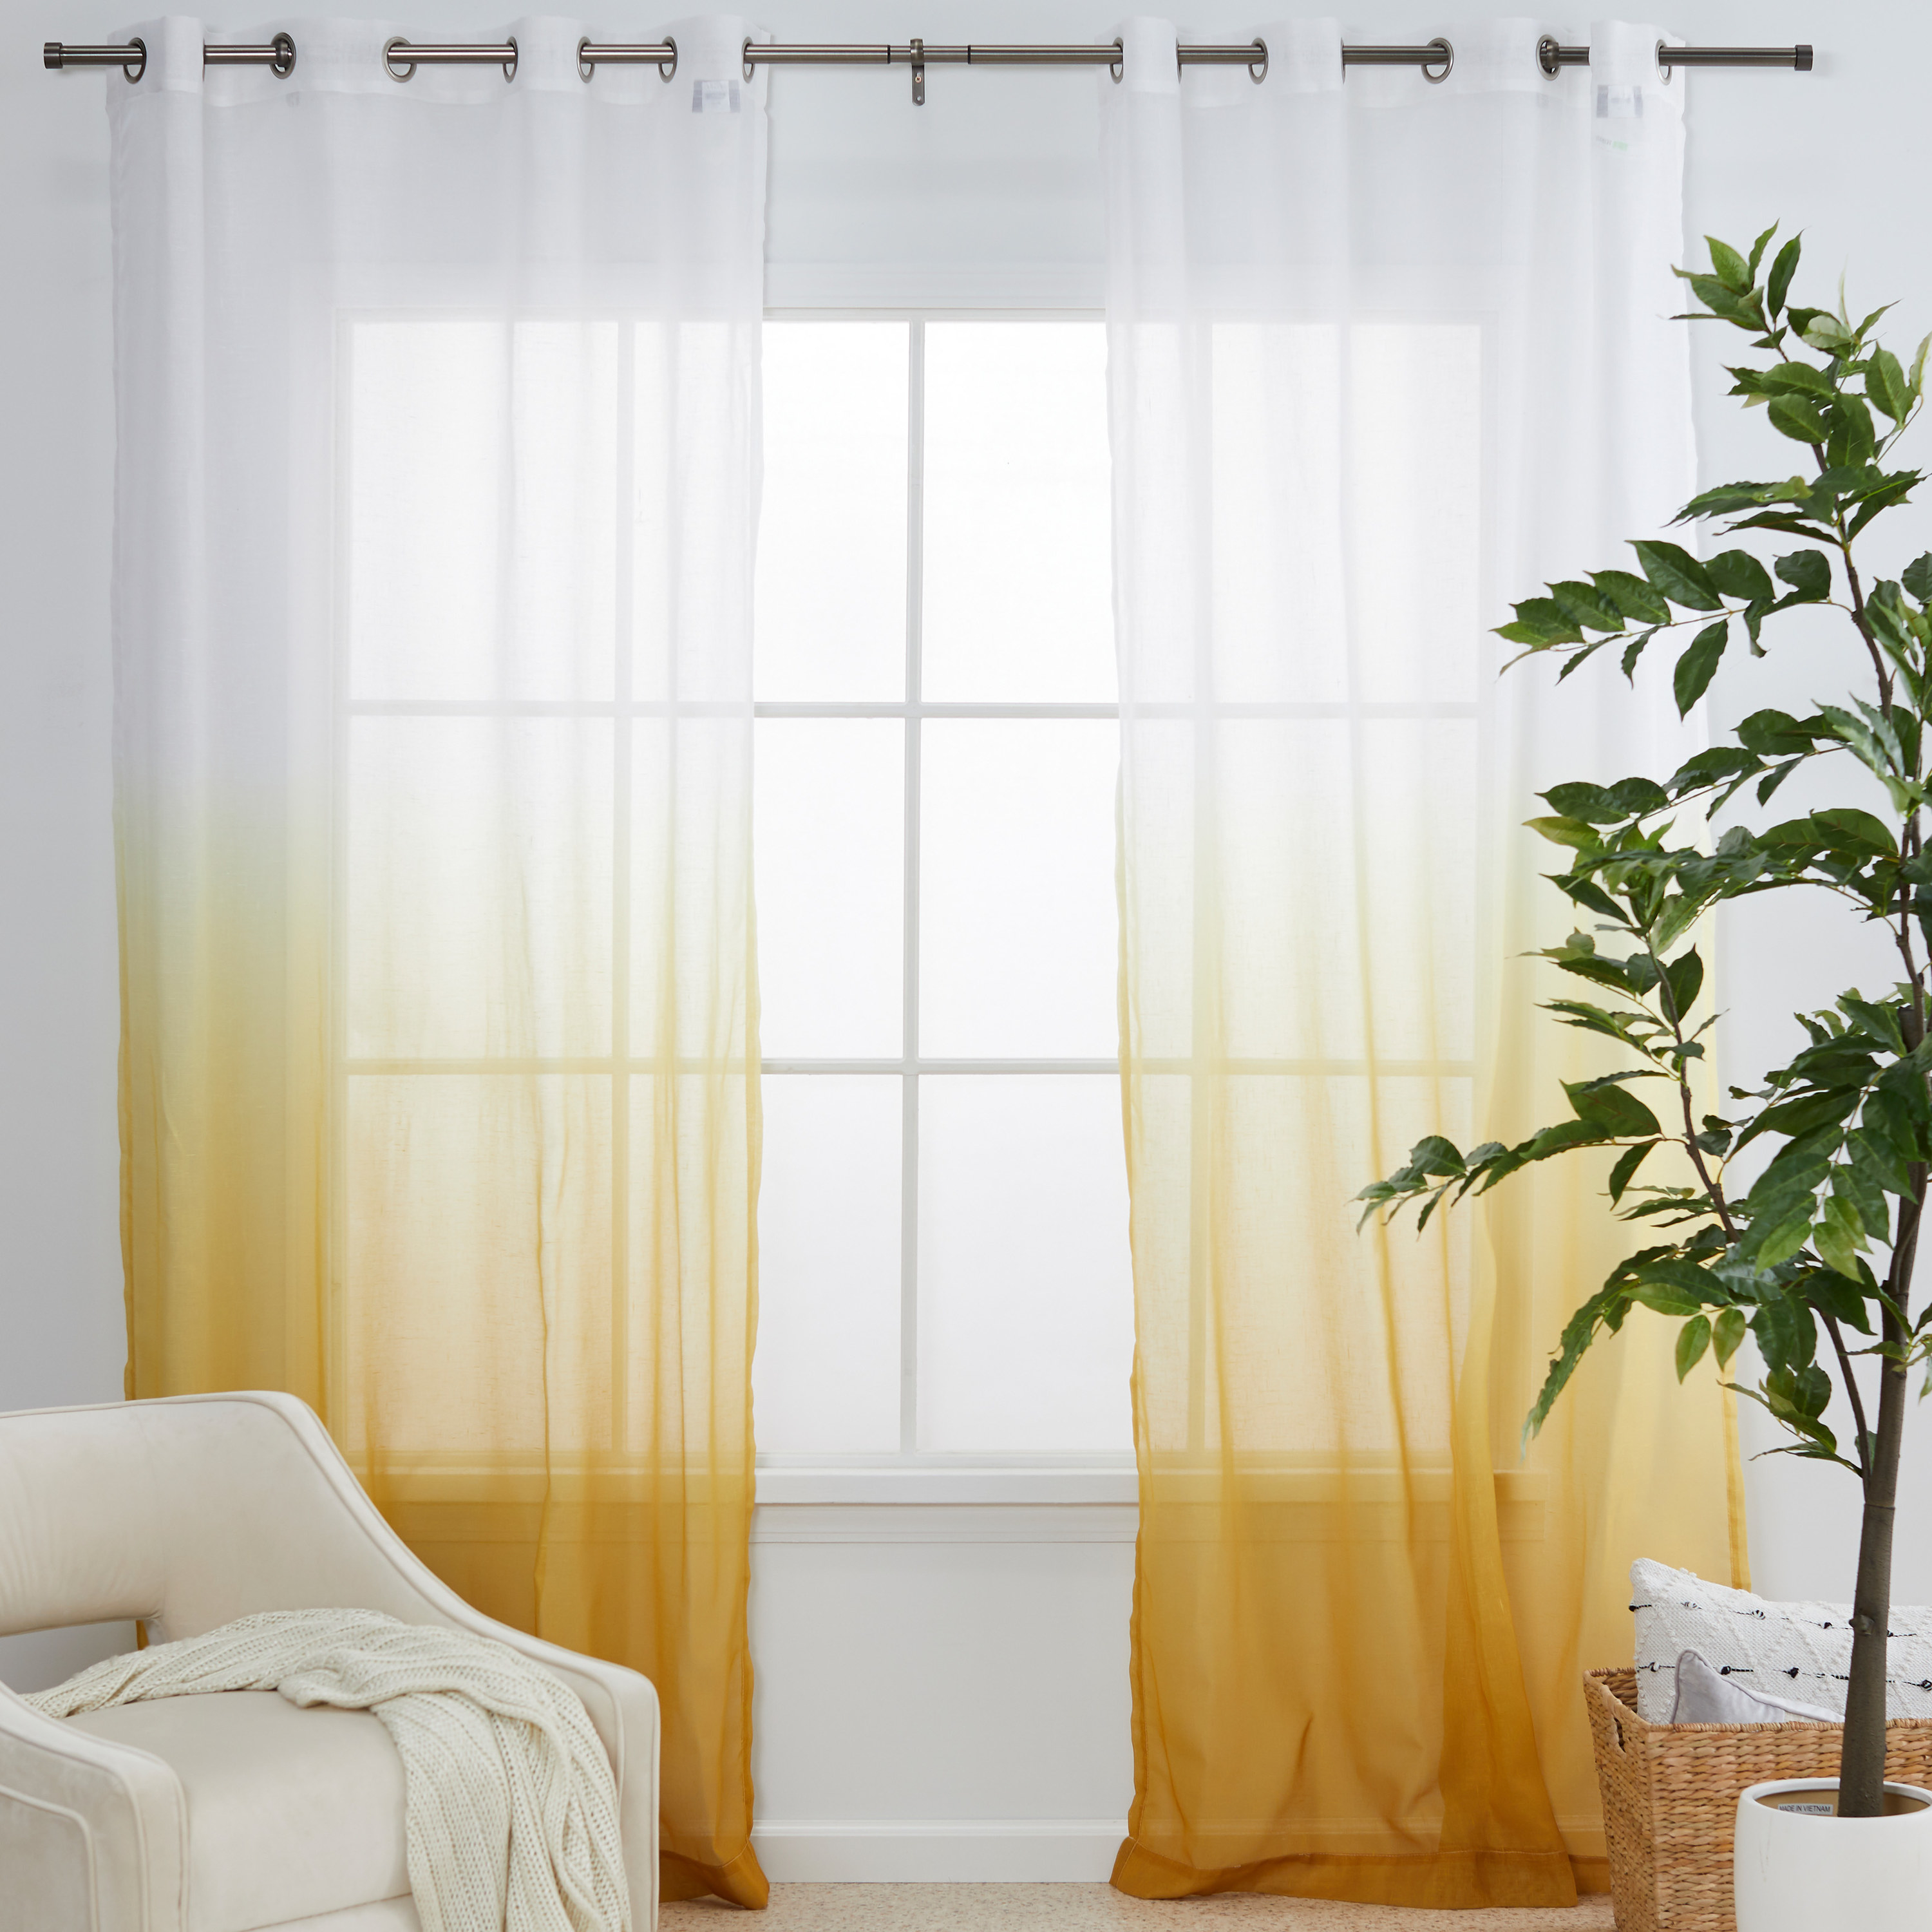 The white and gold ombre sheer curtains 